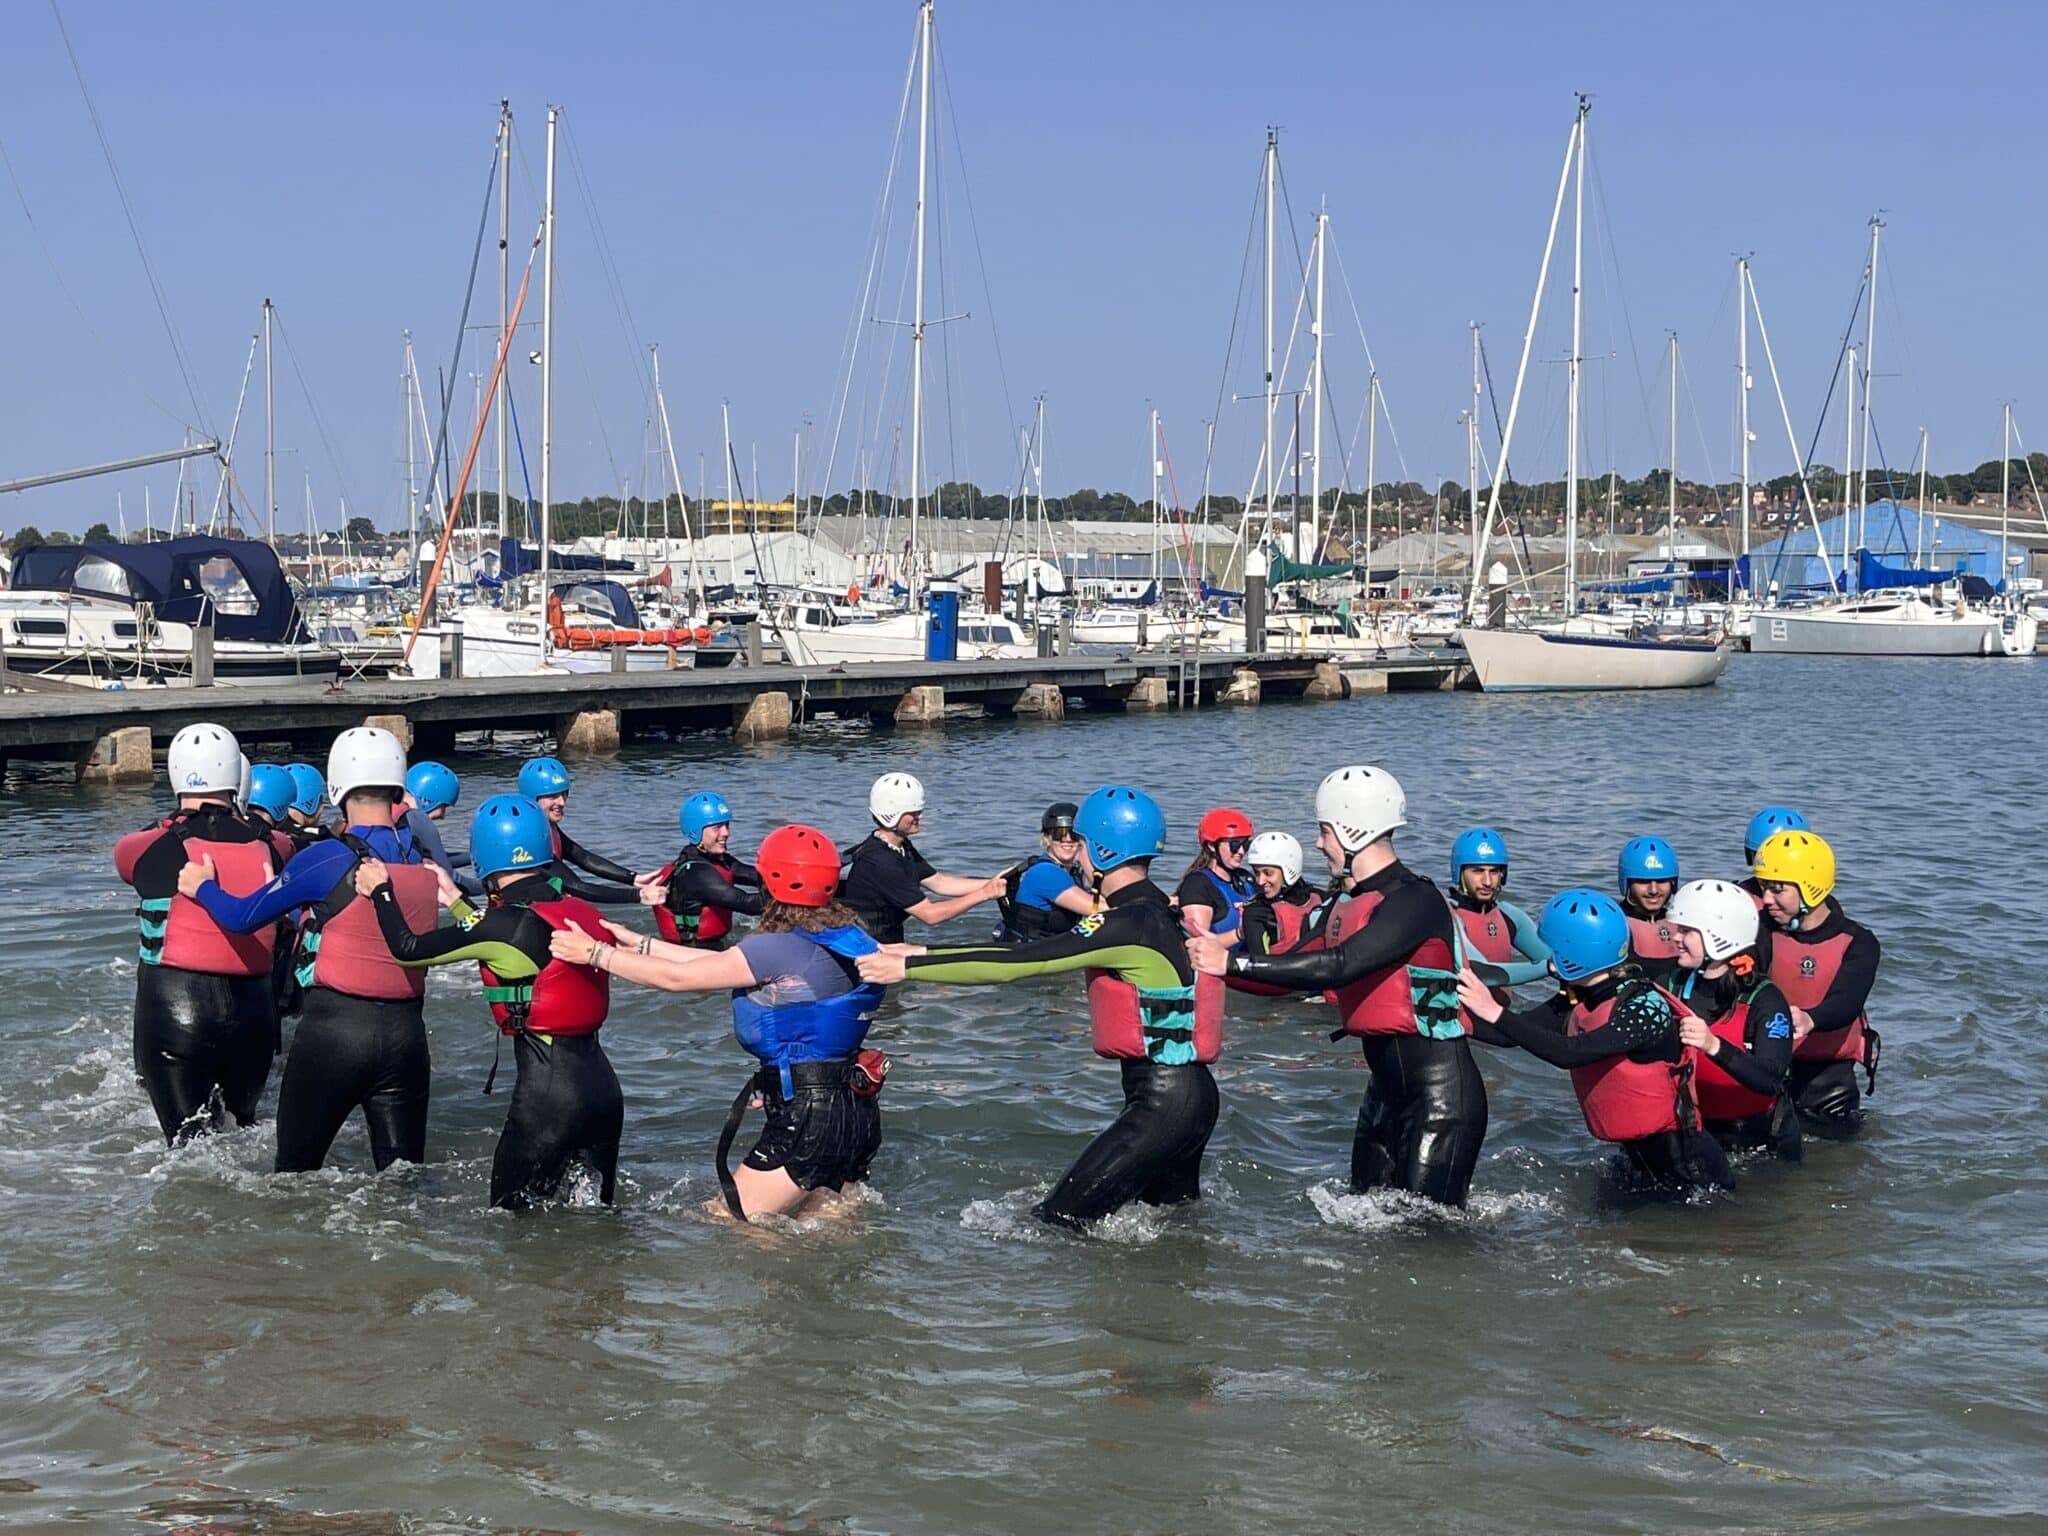 Students in the water demonstrating skills